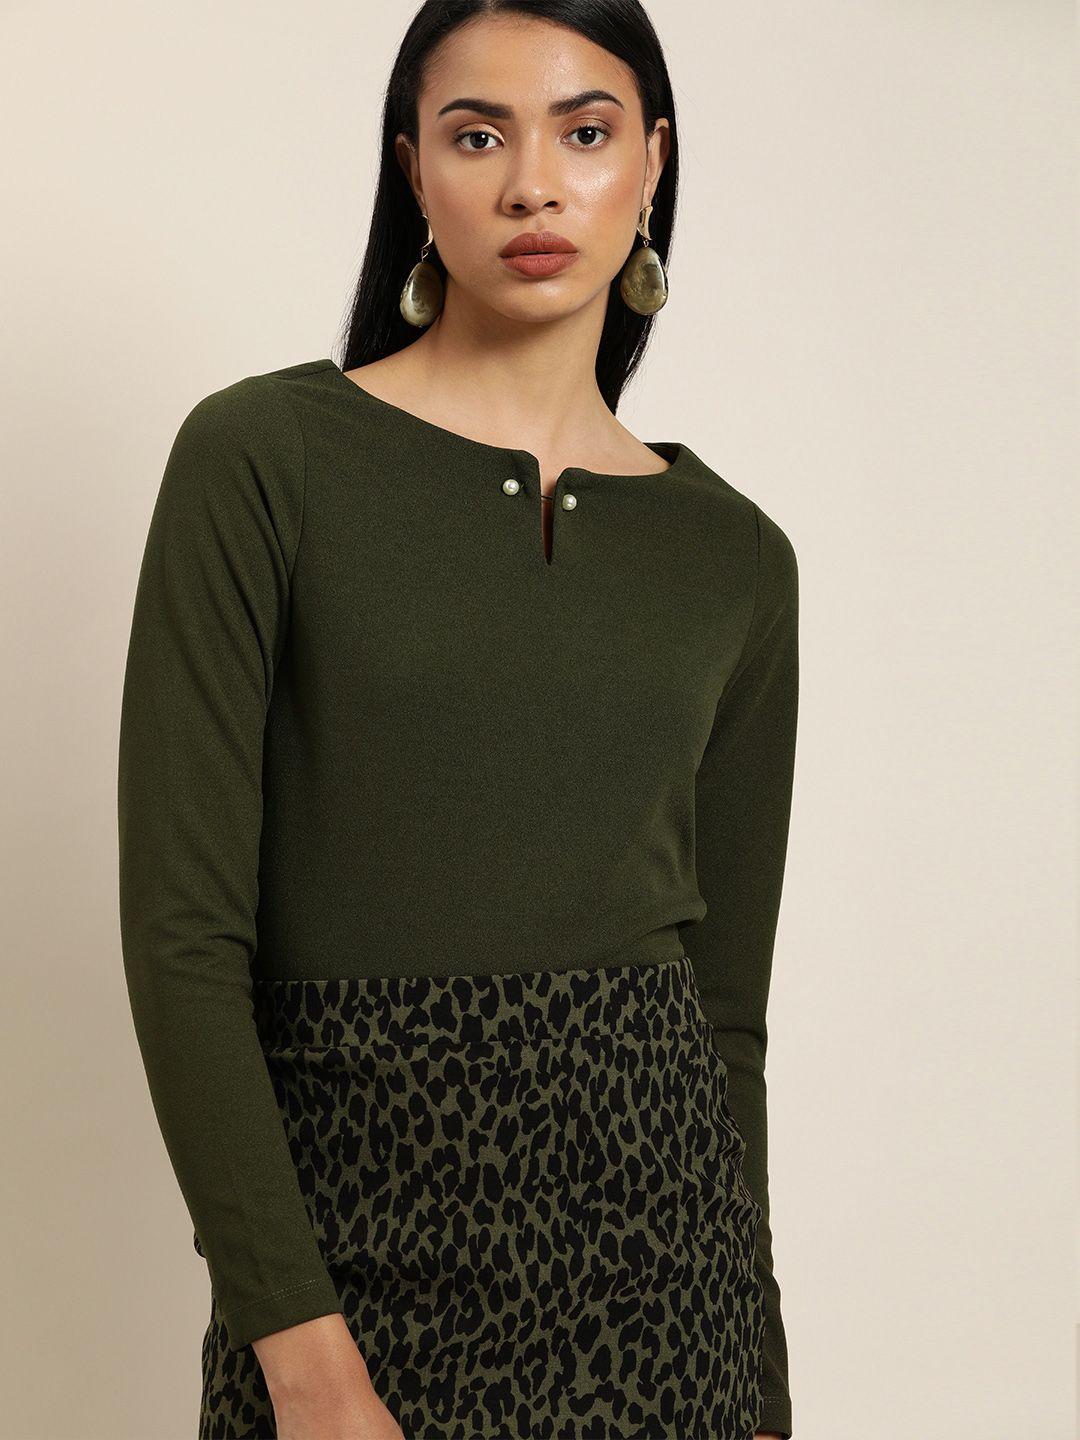 her by invictus women olive green solid top with an embellished closure